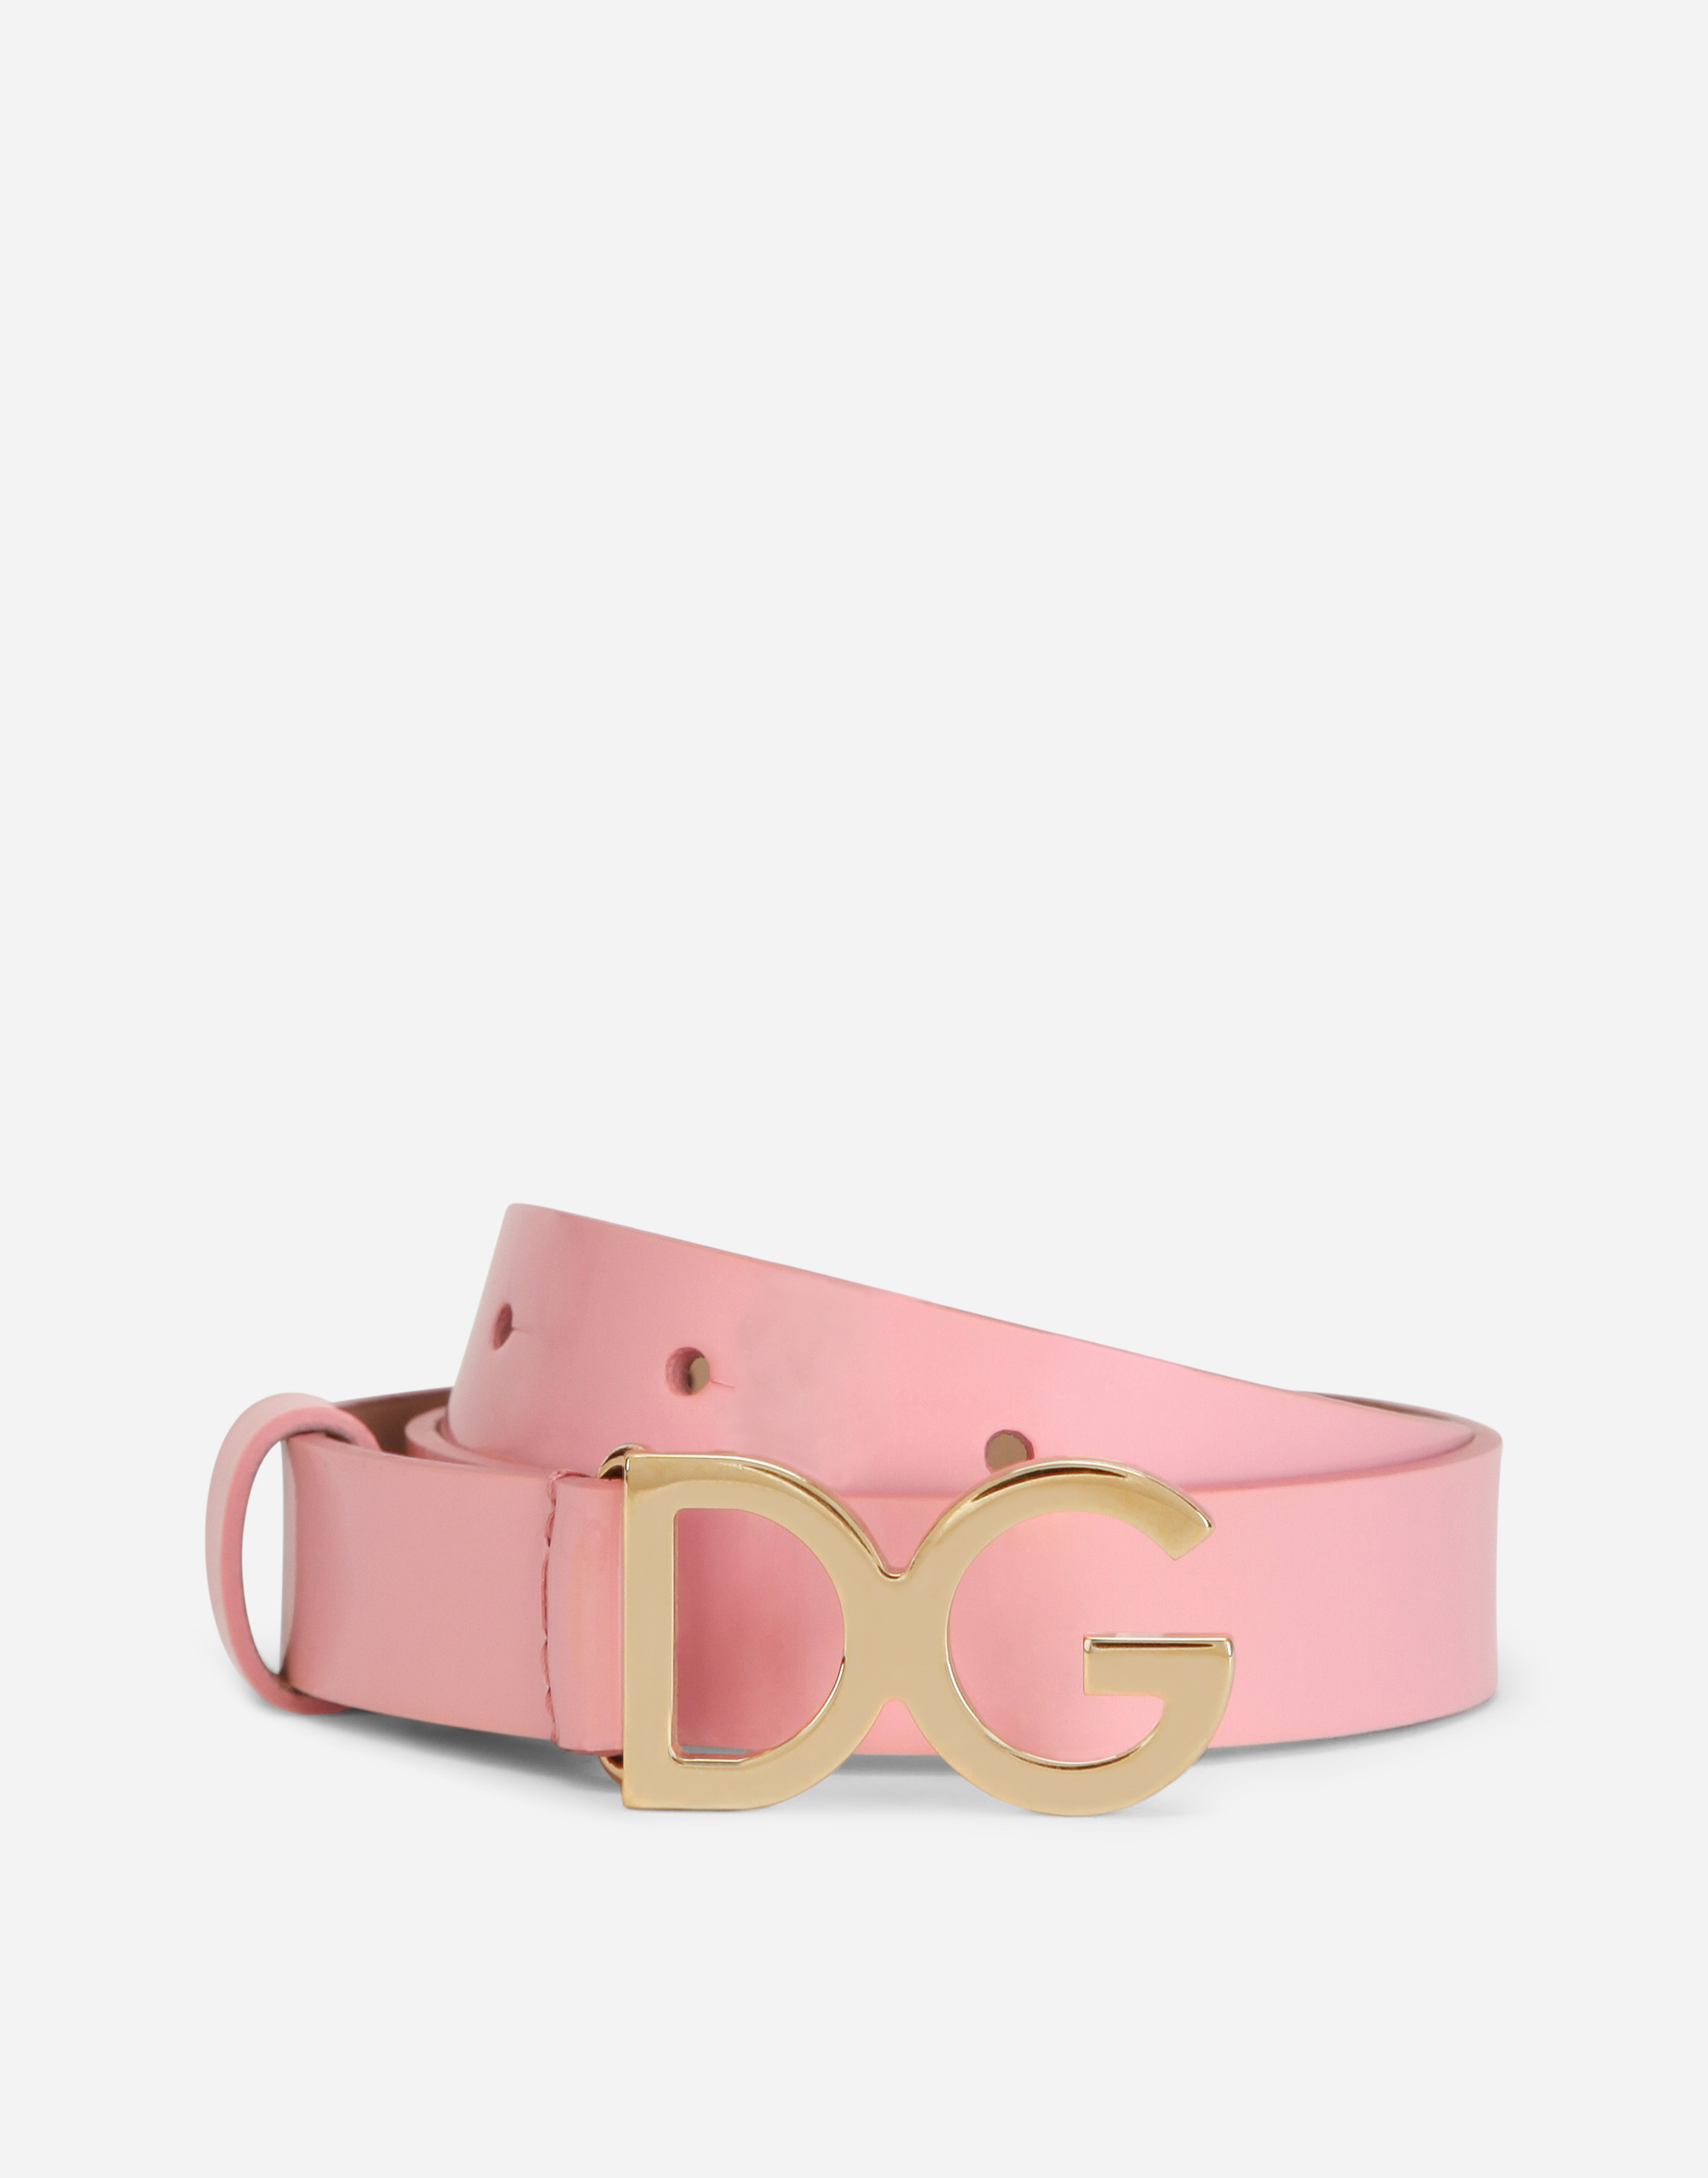 Patent leather belt with DG buckle in Pink